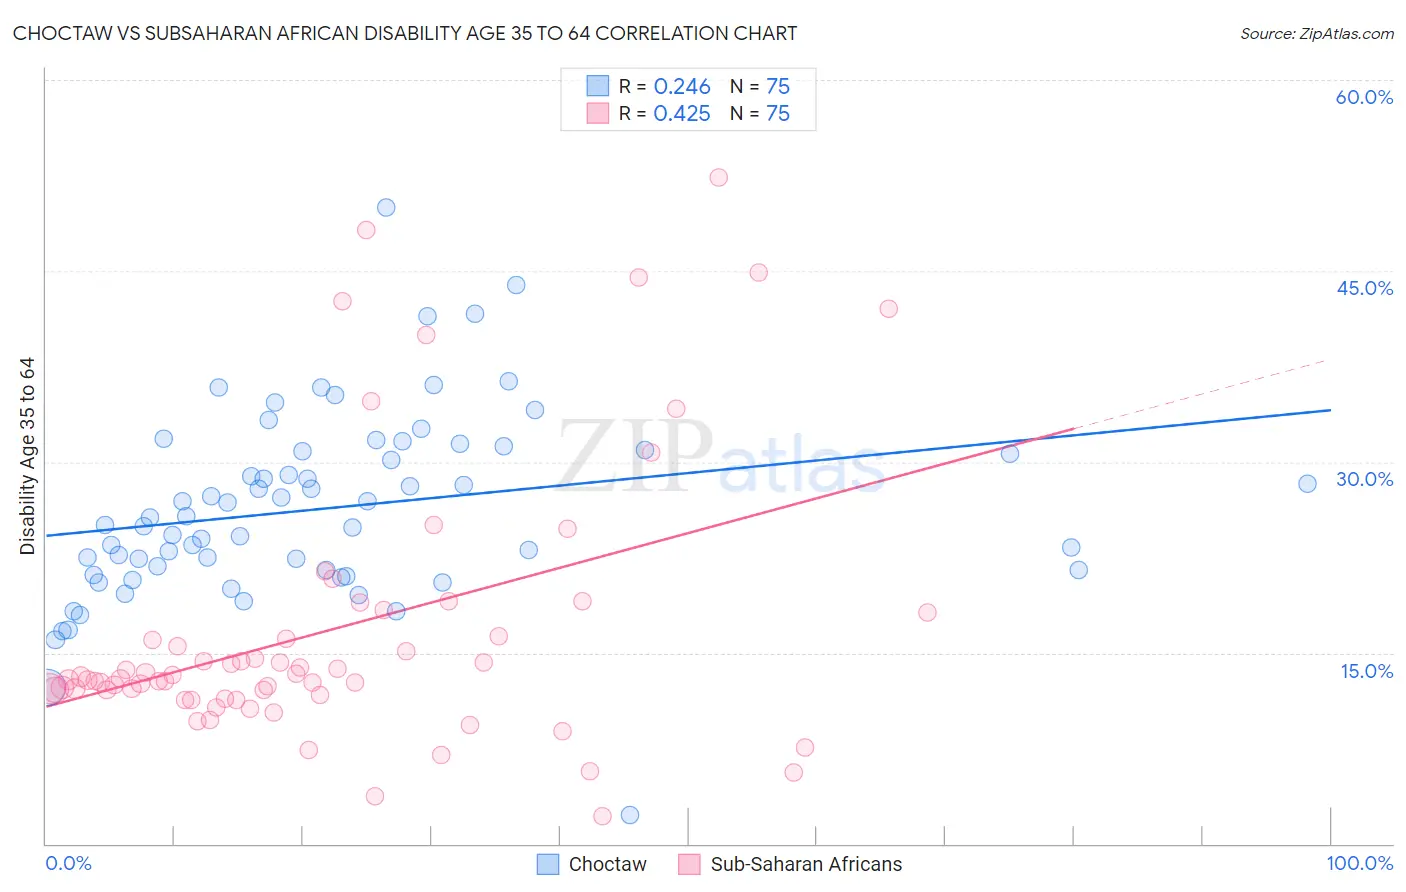 Choctaw vs Subsaharan African Disability Age 35 to 64